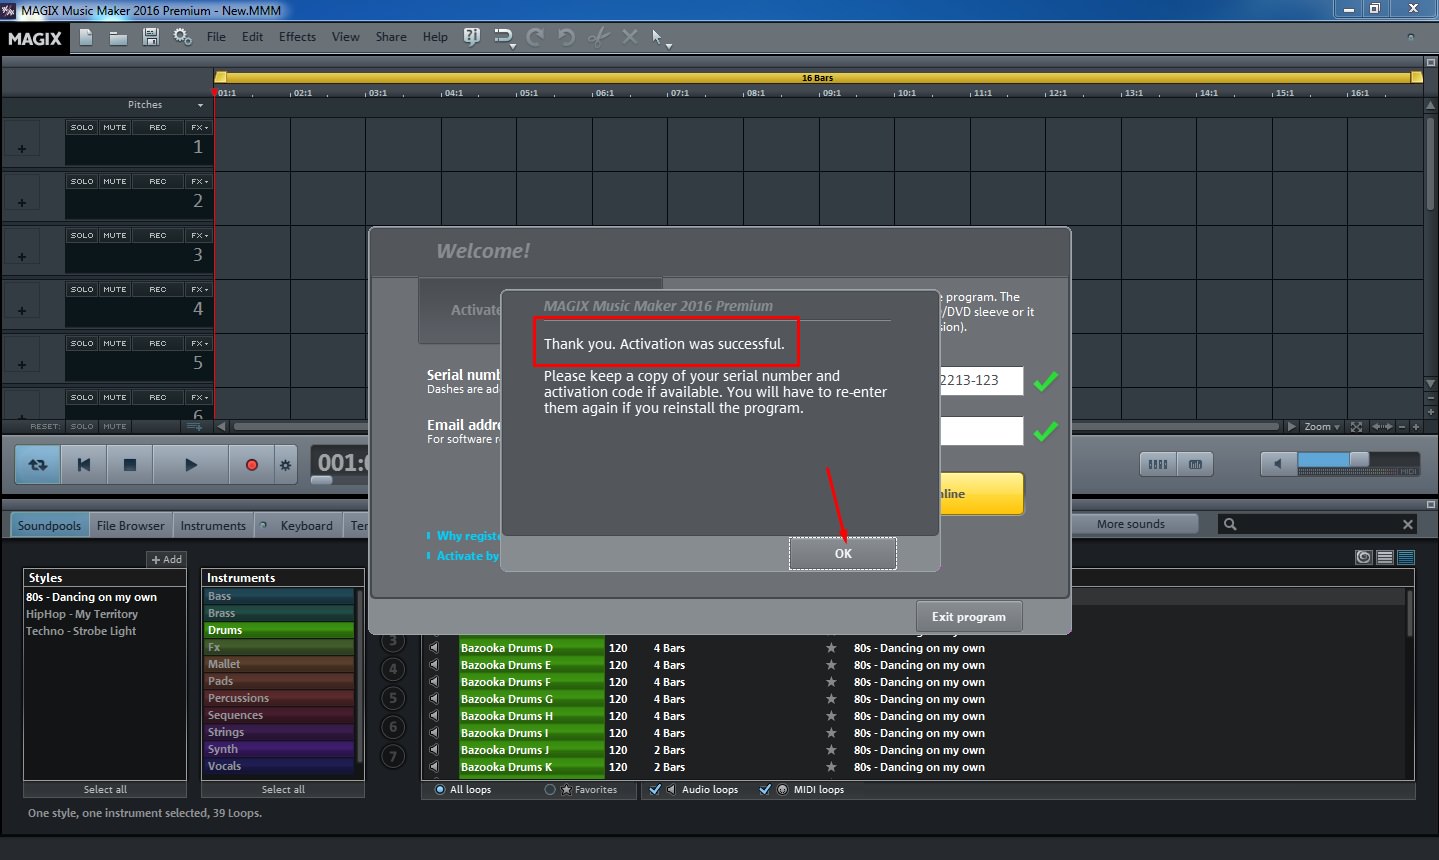 where can i download soundpools for magix music maker